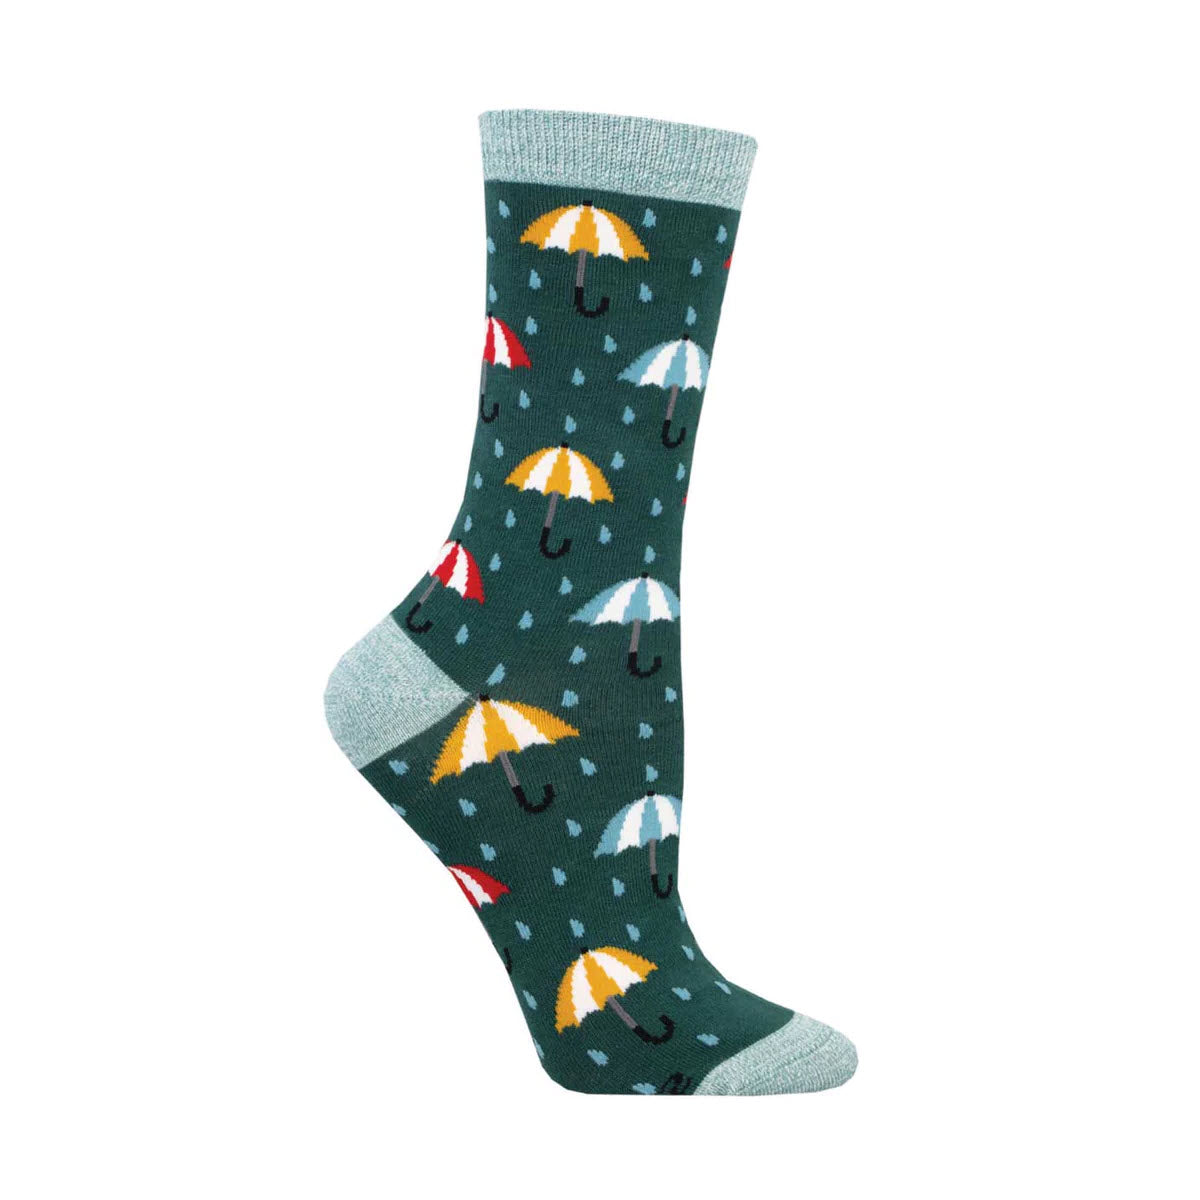 A single SOCKSMITH BAMBOO CREW SOCK adorned with colorful umbrella patterns, displayed against a white background, evokes the joy of dancing in the rain.